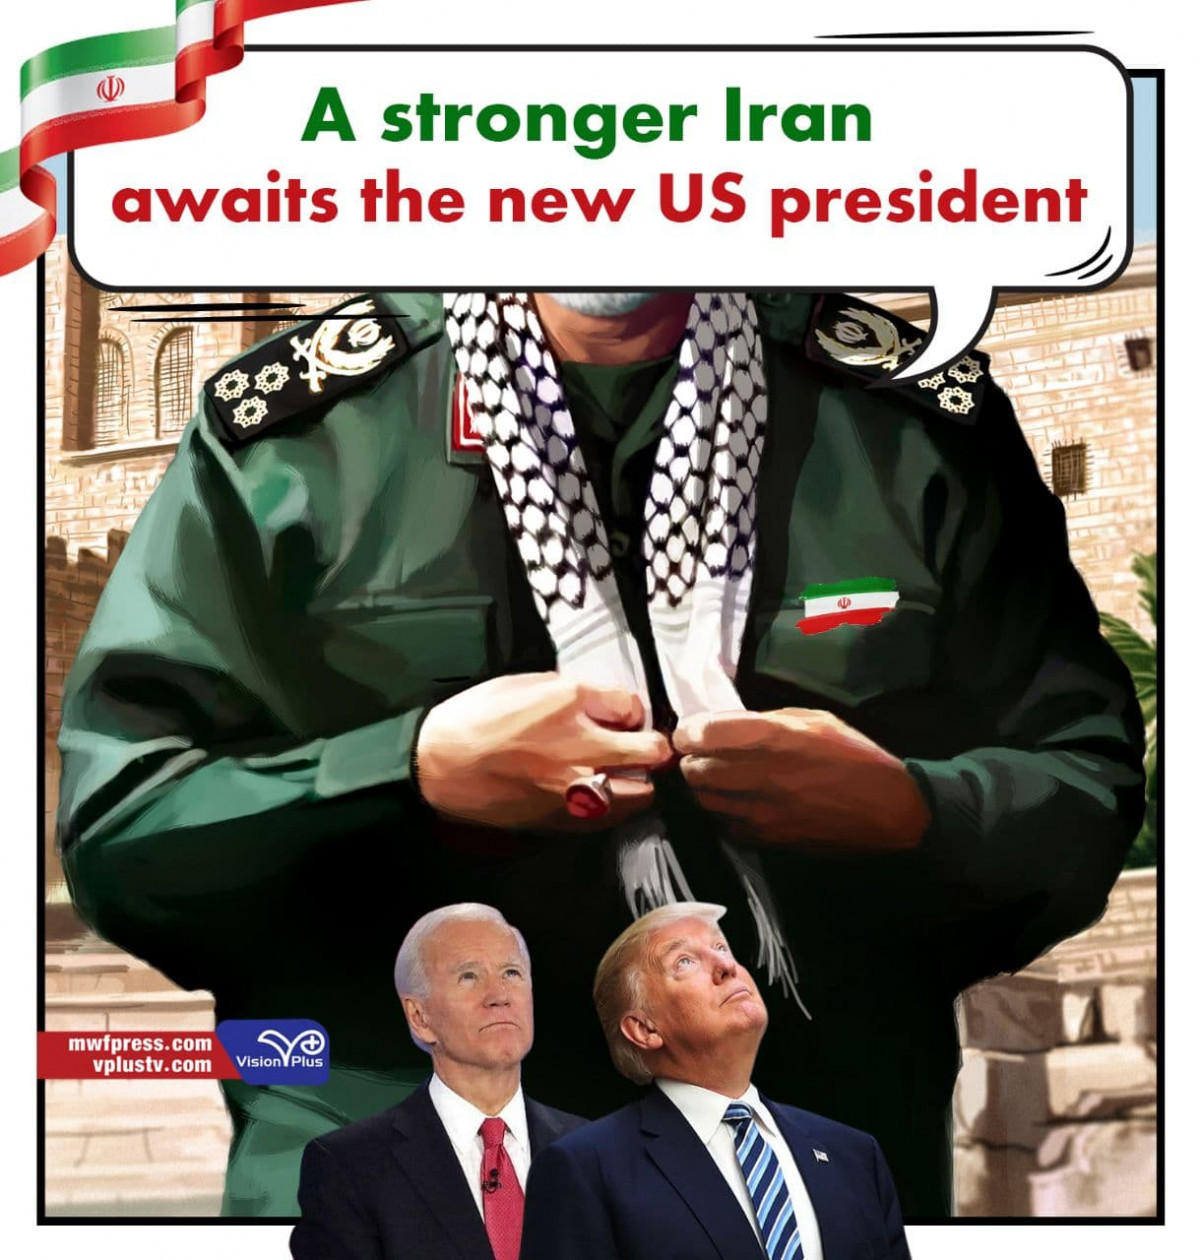 A stronger Iran awaits the new US president